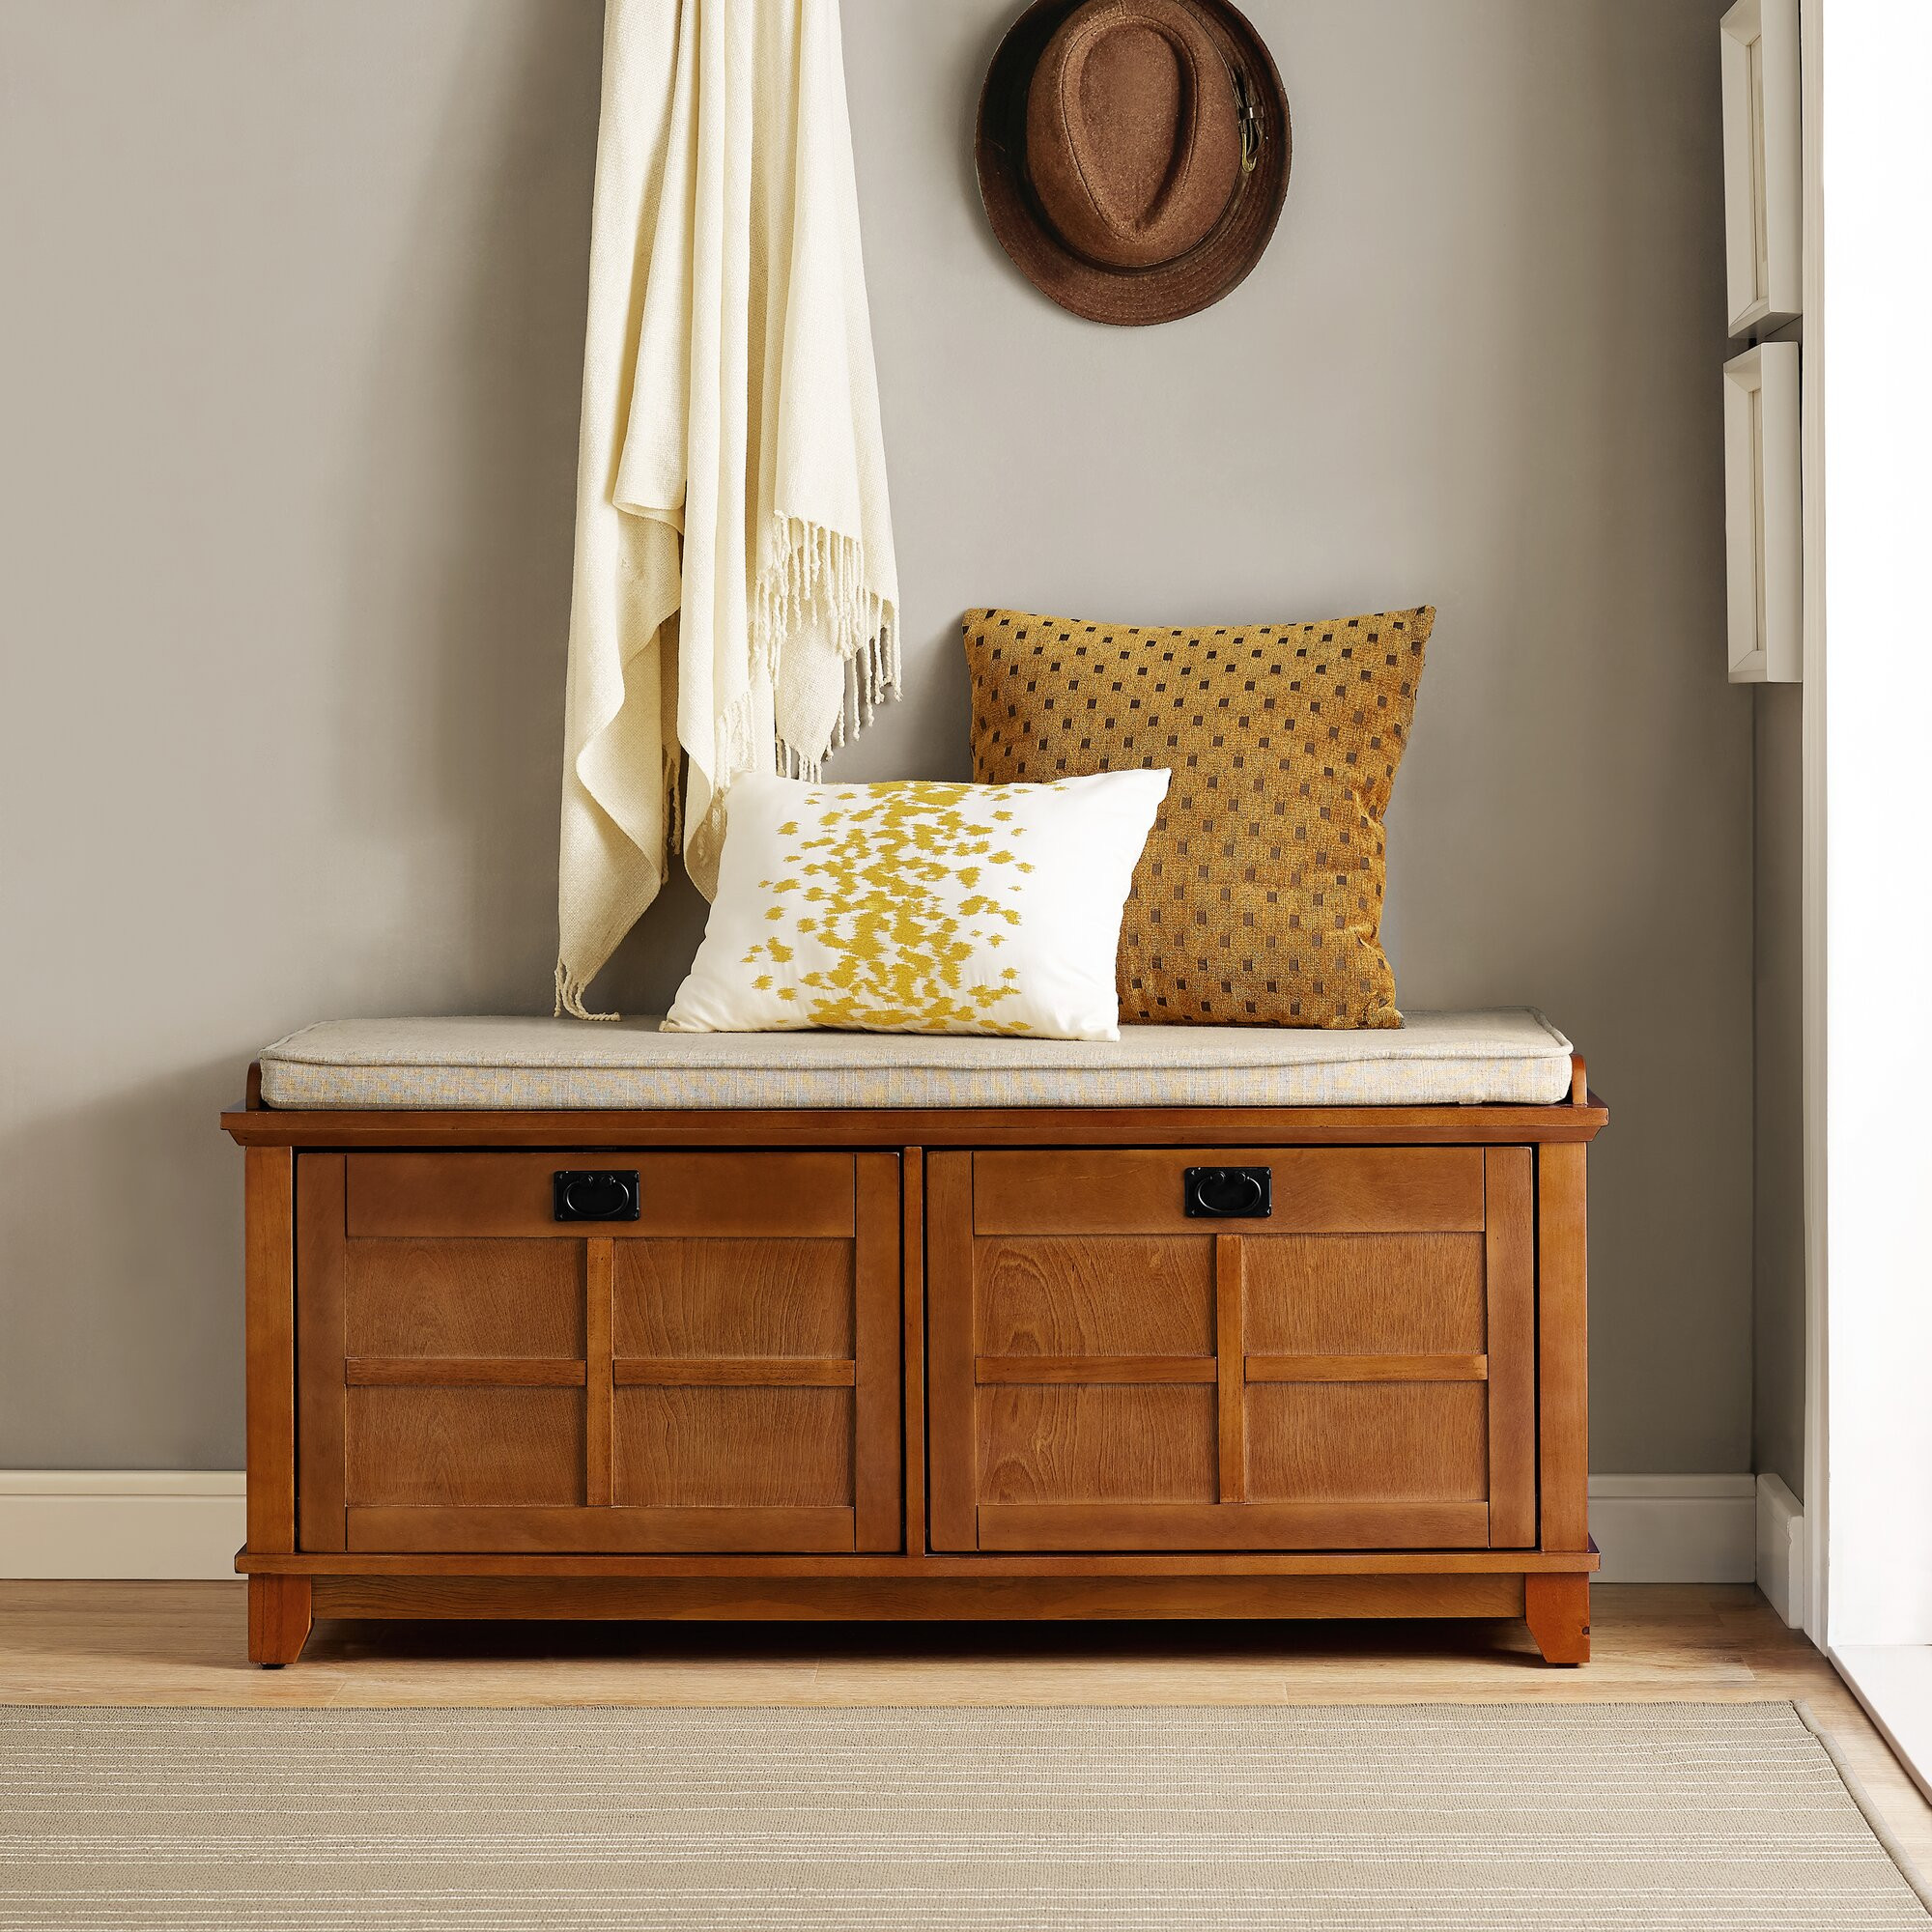 Entry Bench With Storage
 Bay Isle Home Haddam Fabric Storage Entryway Bench